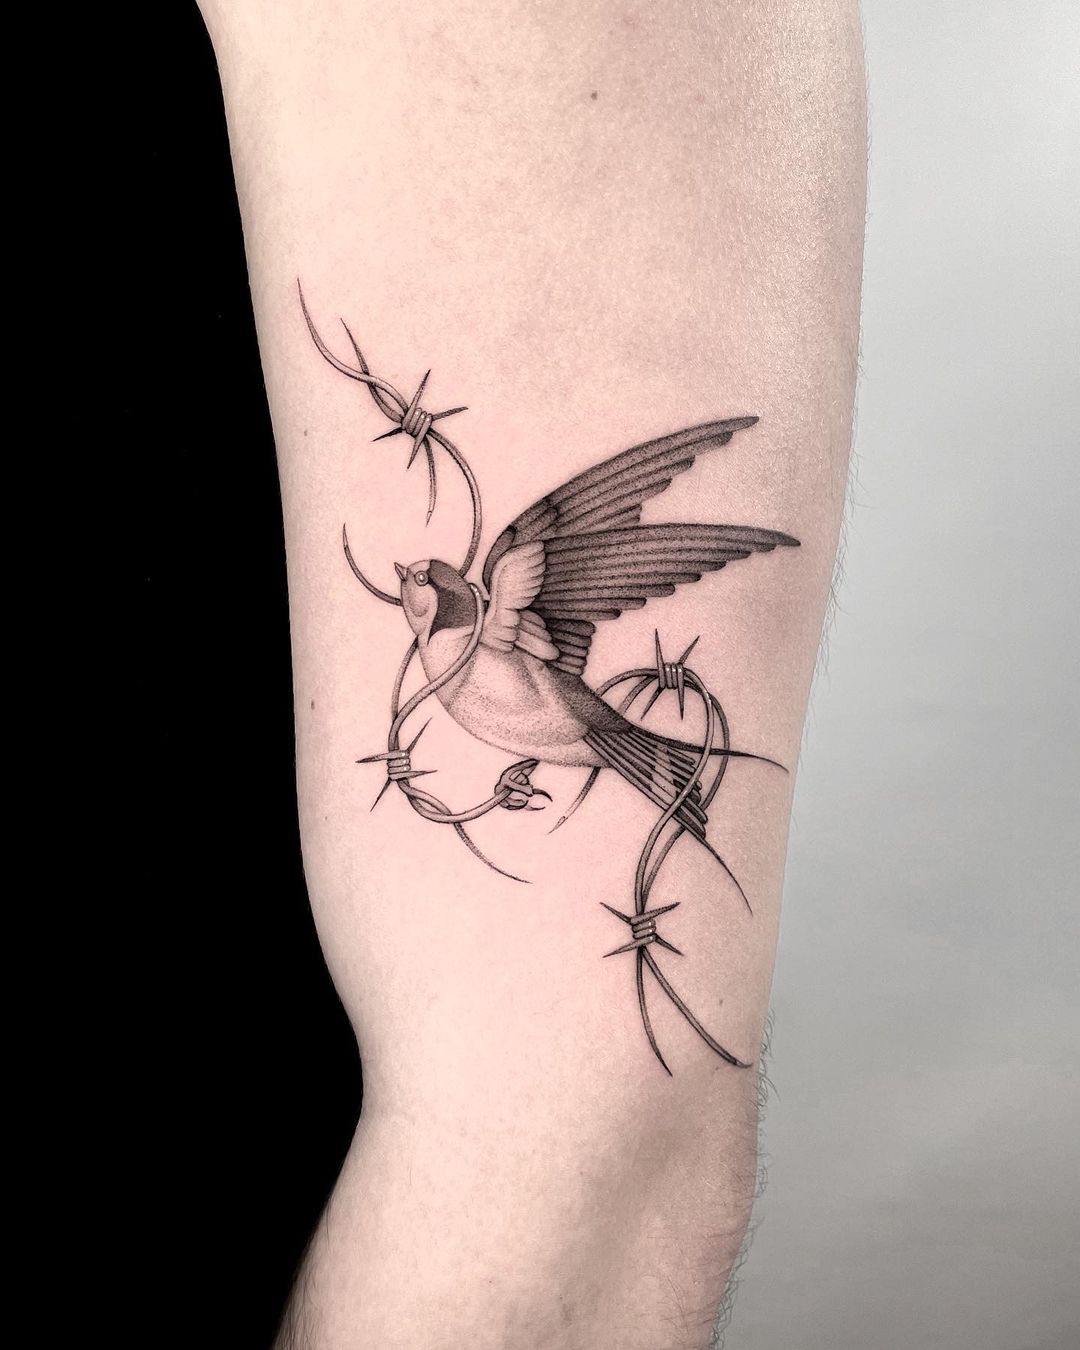 Swallow tattoo by breadloaf